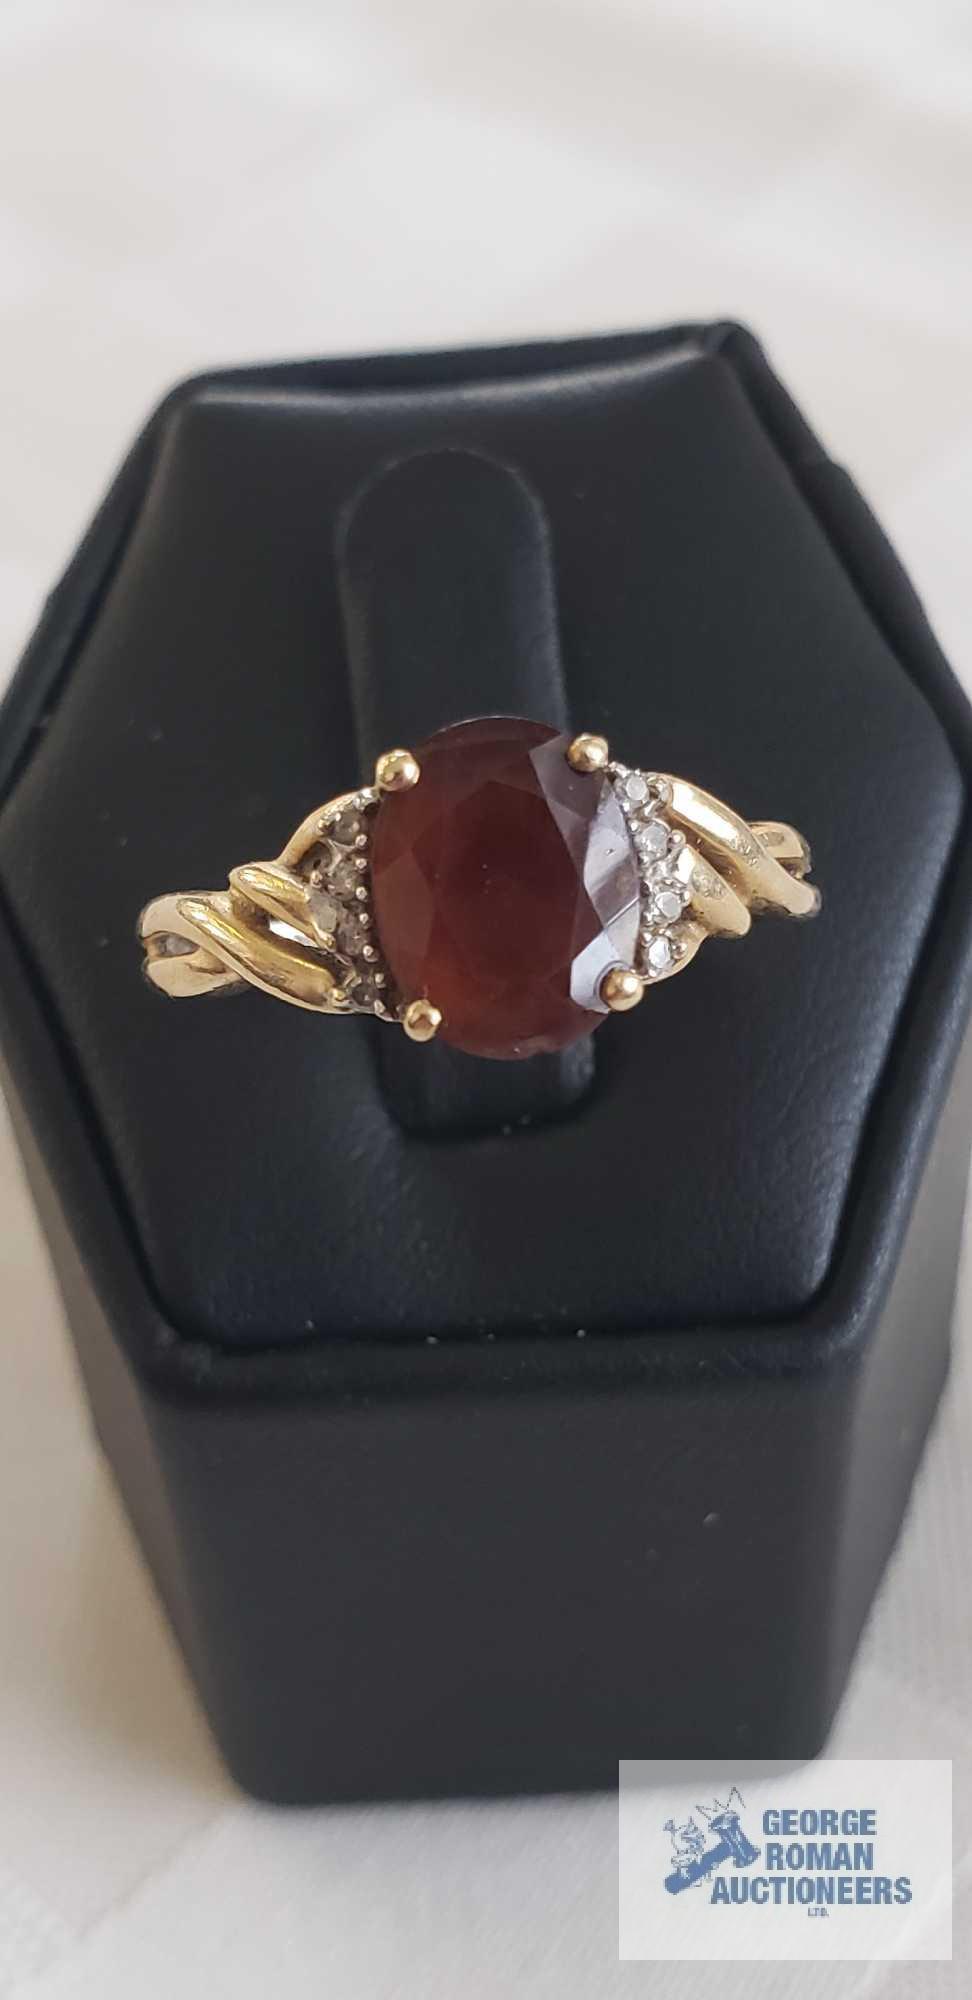 Gold colored ring with a large dark red gemstone, clear gemstones on side, twisted band, marked 14K,